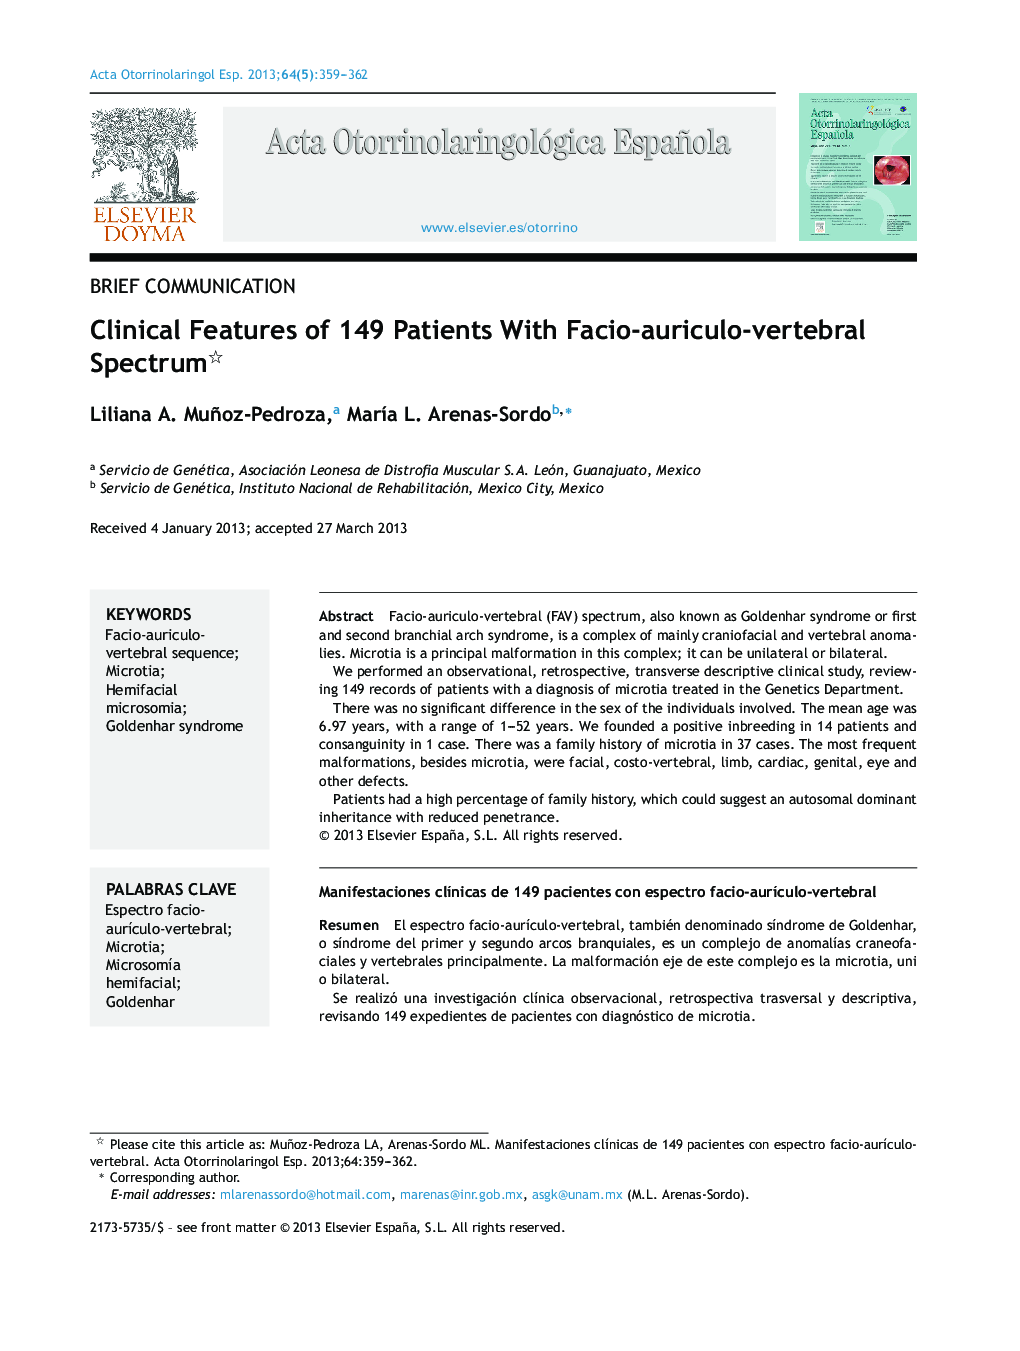 Clinical Features of 149 Patients With Facio-auriculo-vertebral Spectrum 